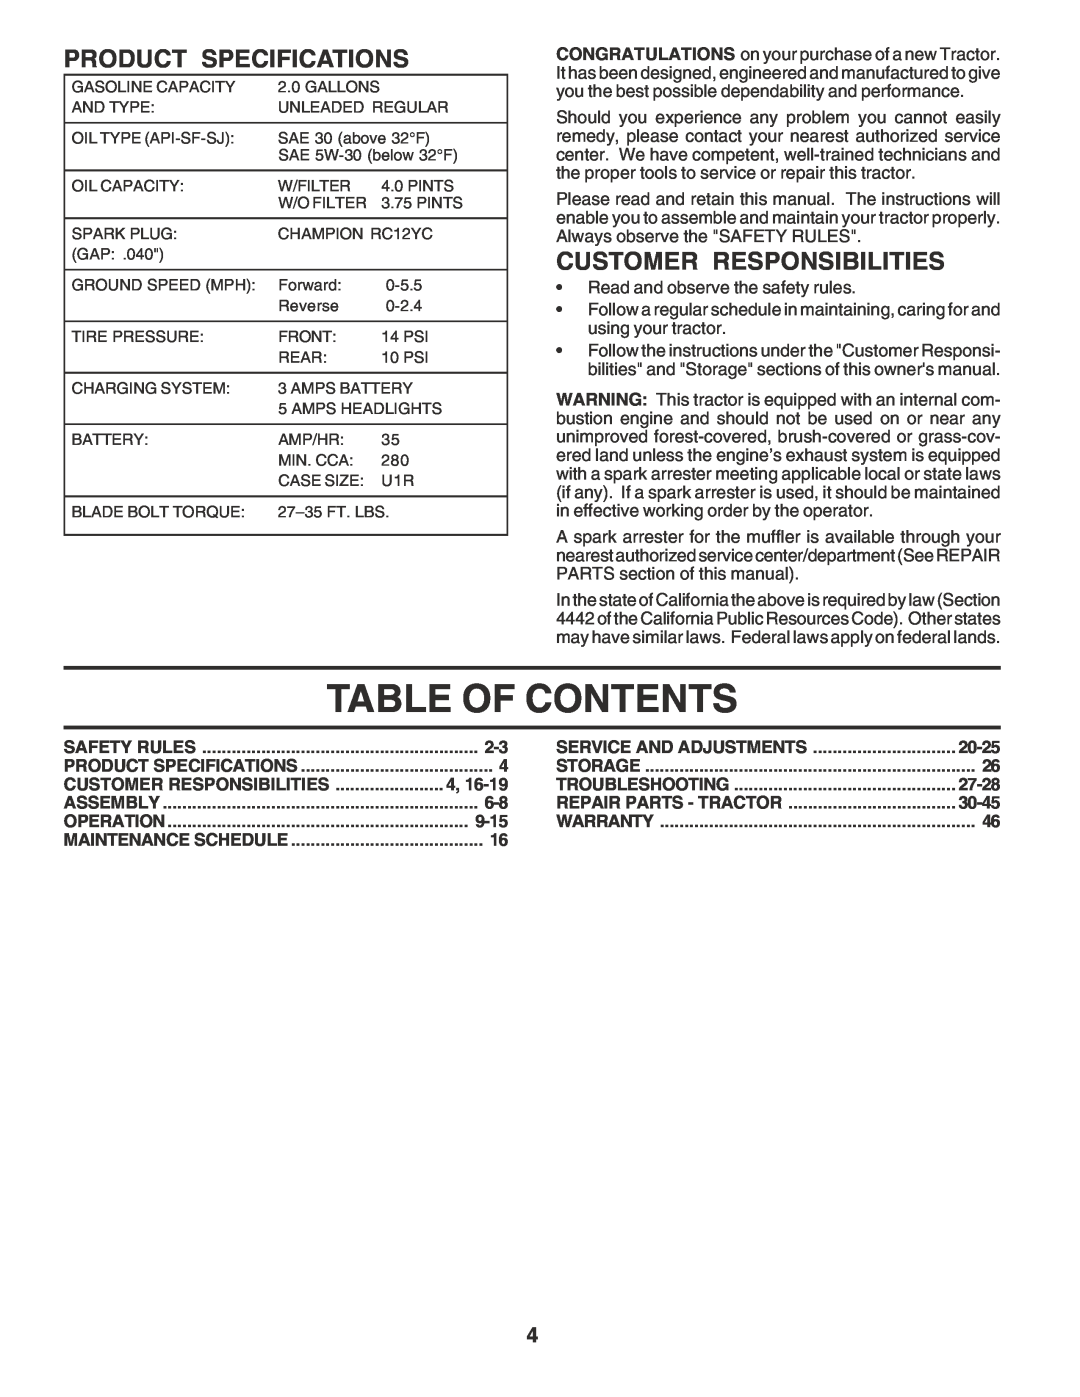 Poulan PR185H42STF owner manual Table Of Contents, Product Specifications, Customer Responsibilities 